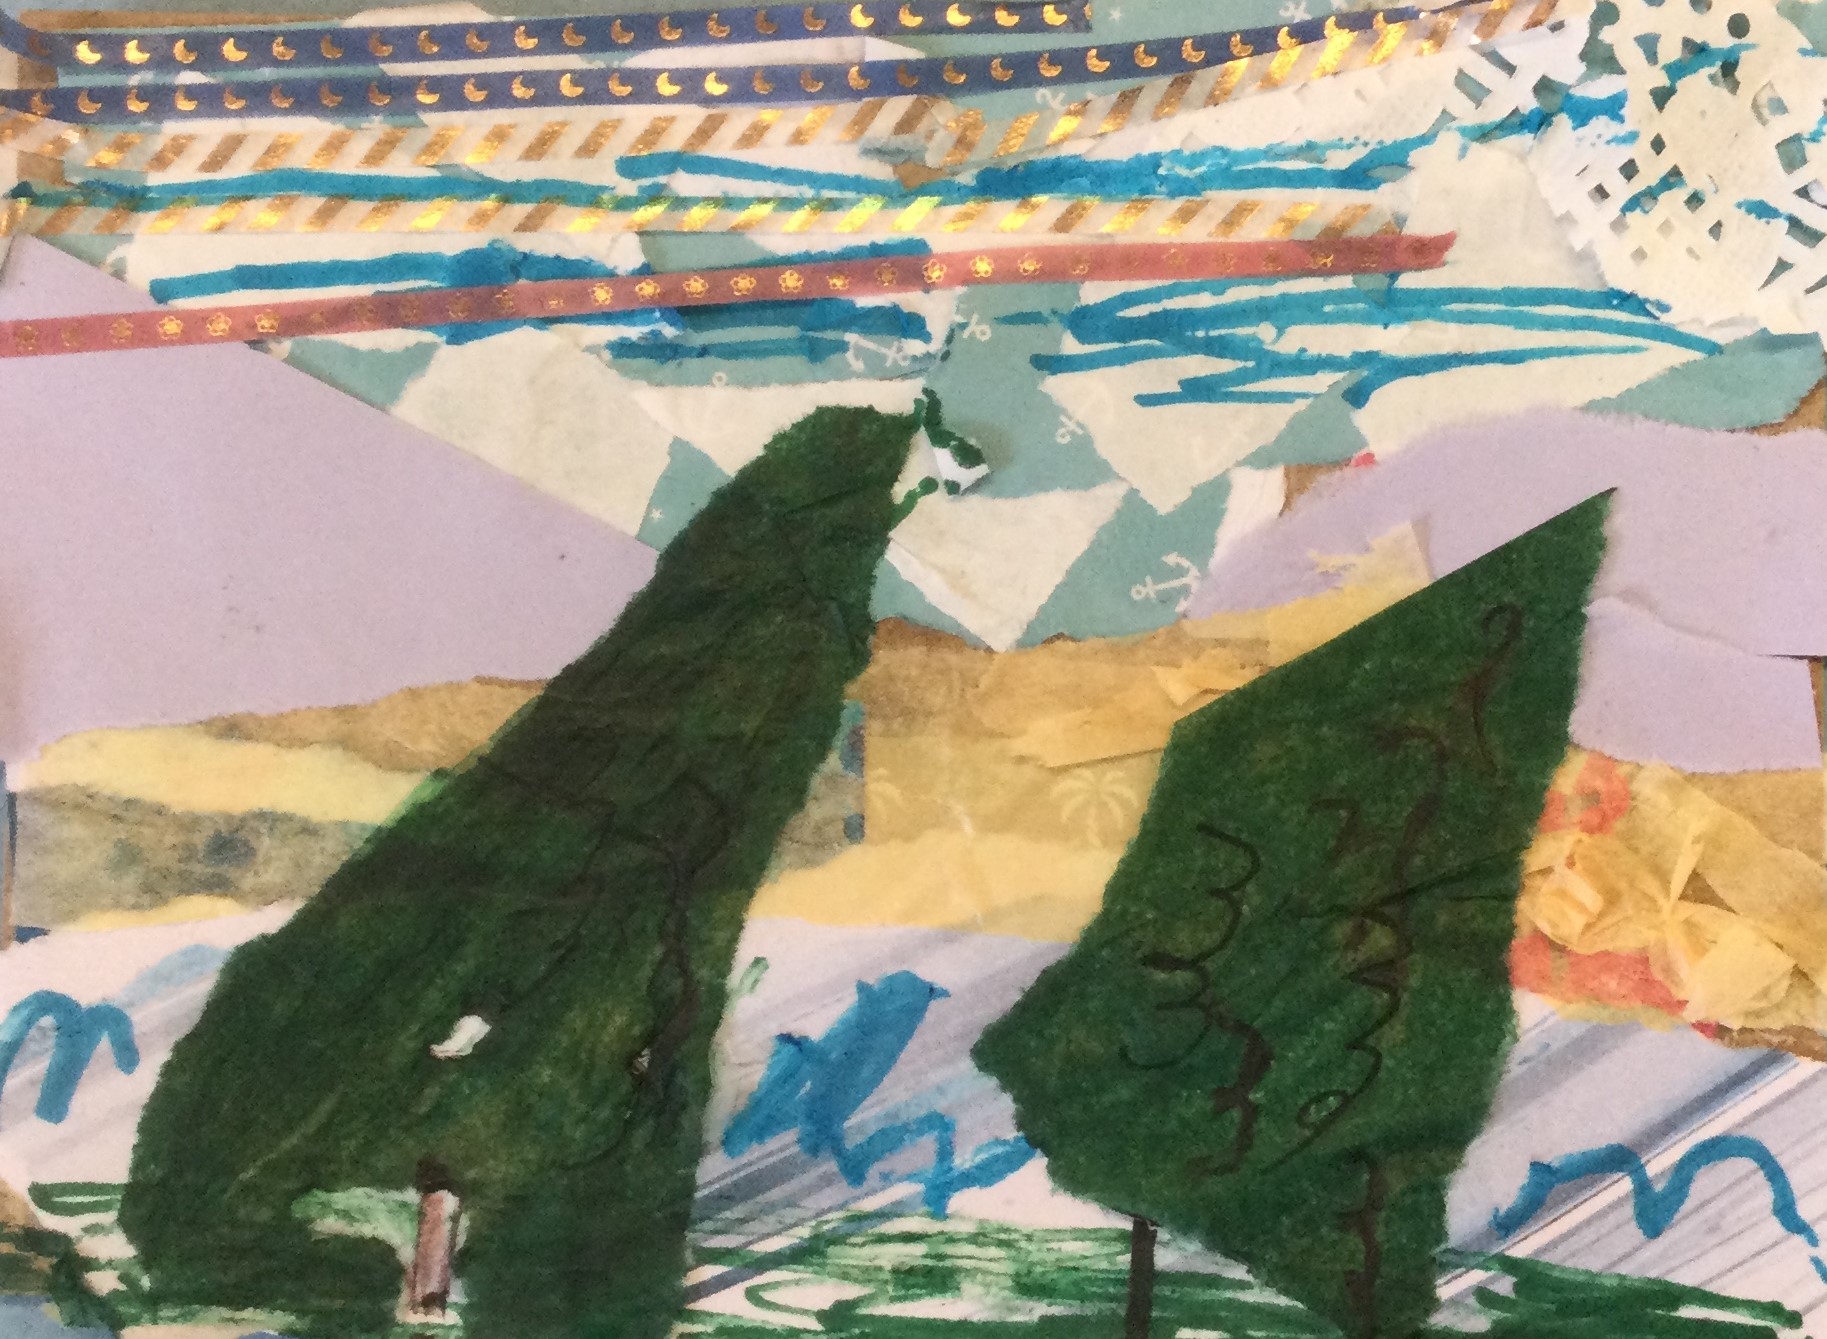 A multicoloured card with strips of thin decorative tape, hand drawn lines in blue, snippets of white doily and yellow tissue paper. In the foreground are two green triangular shapes, but are they sails or trees?